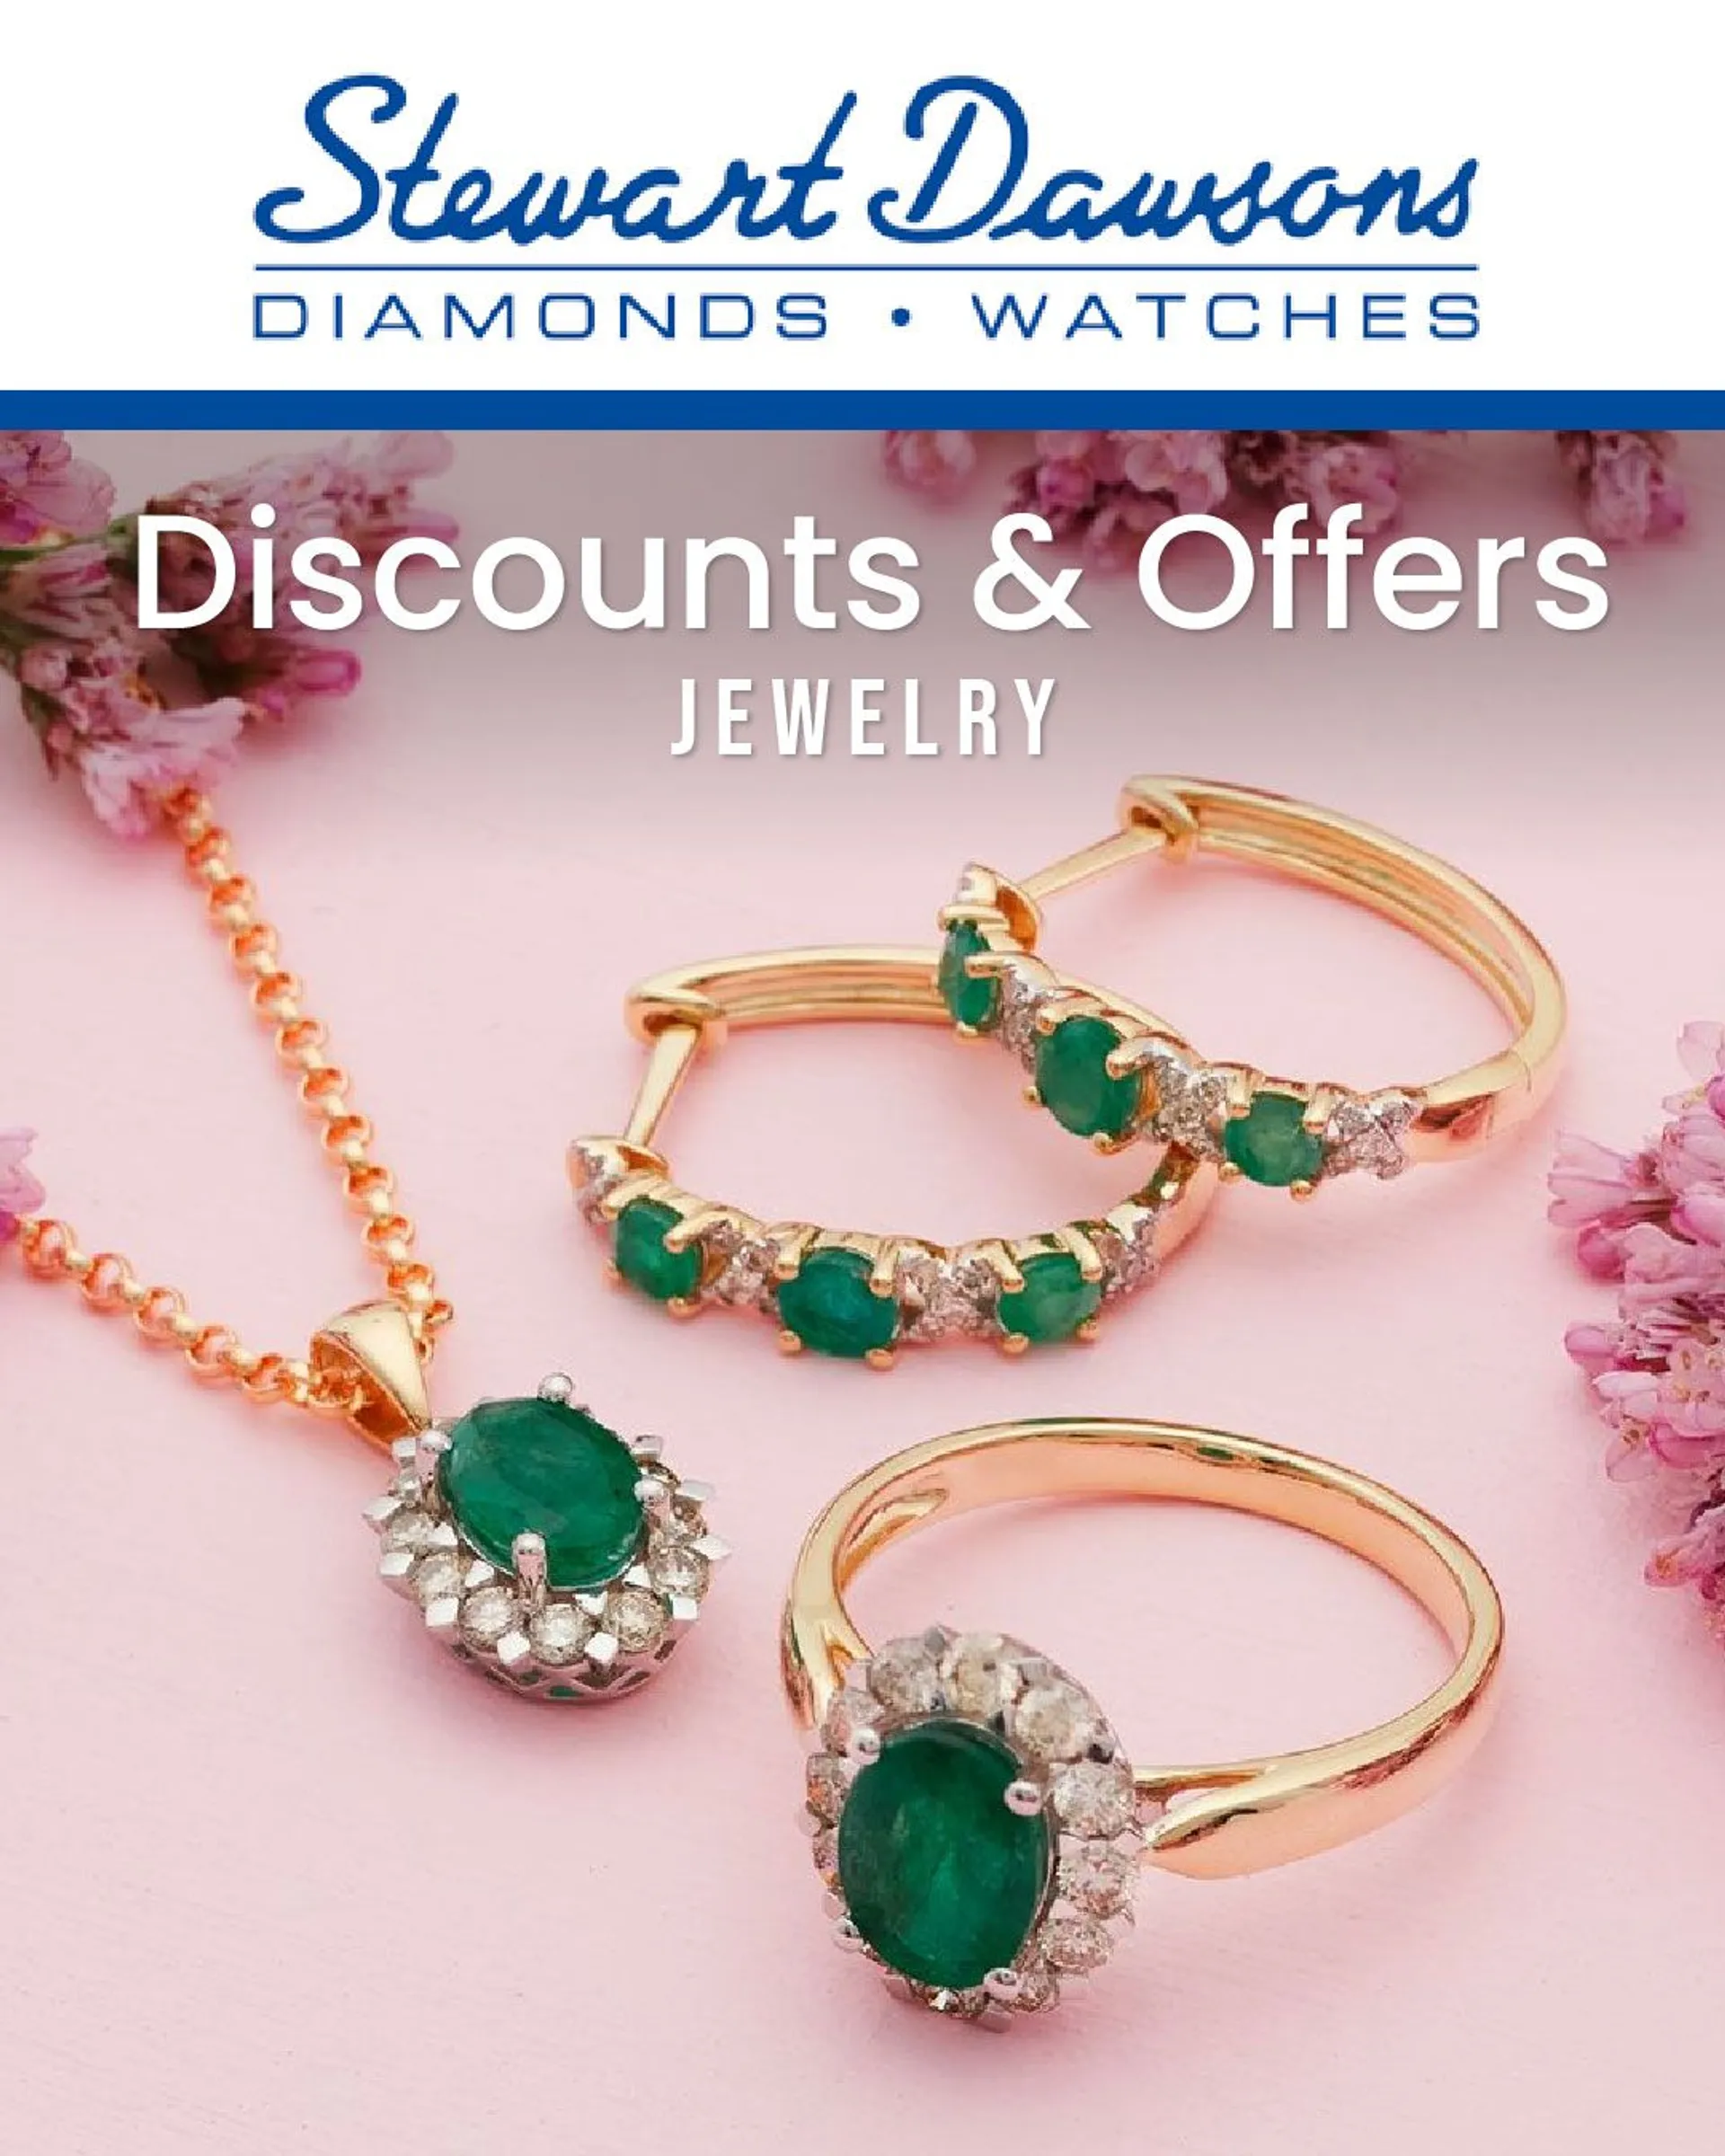 Stewart Dawsons - Jewellery and Watches - 24 April 29 April 2024 - Page 1